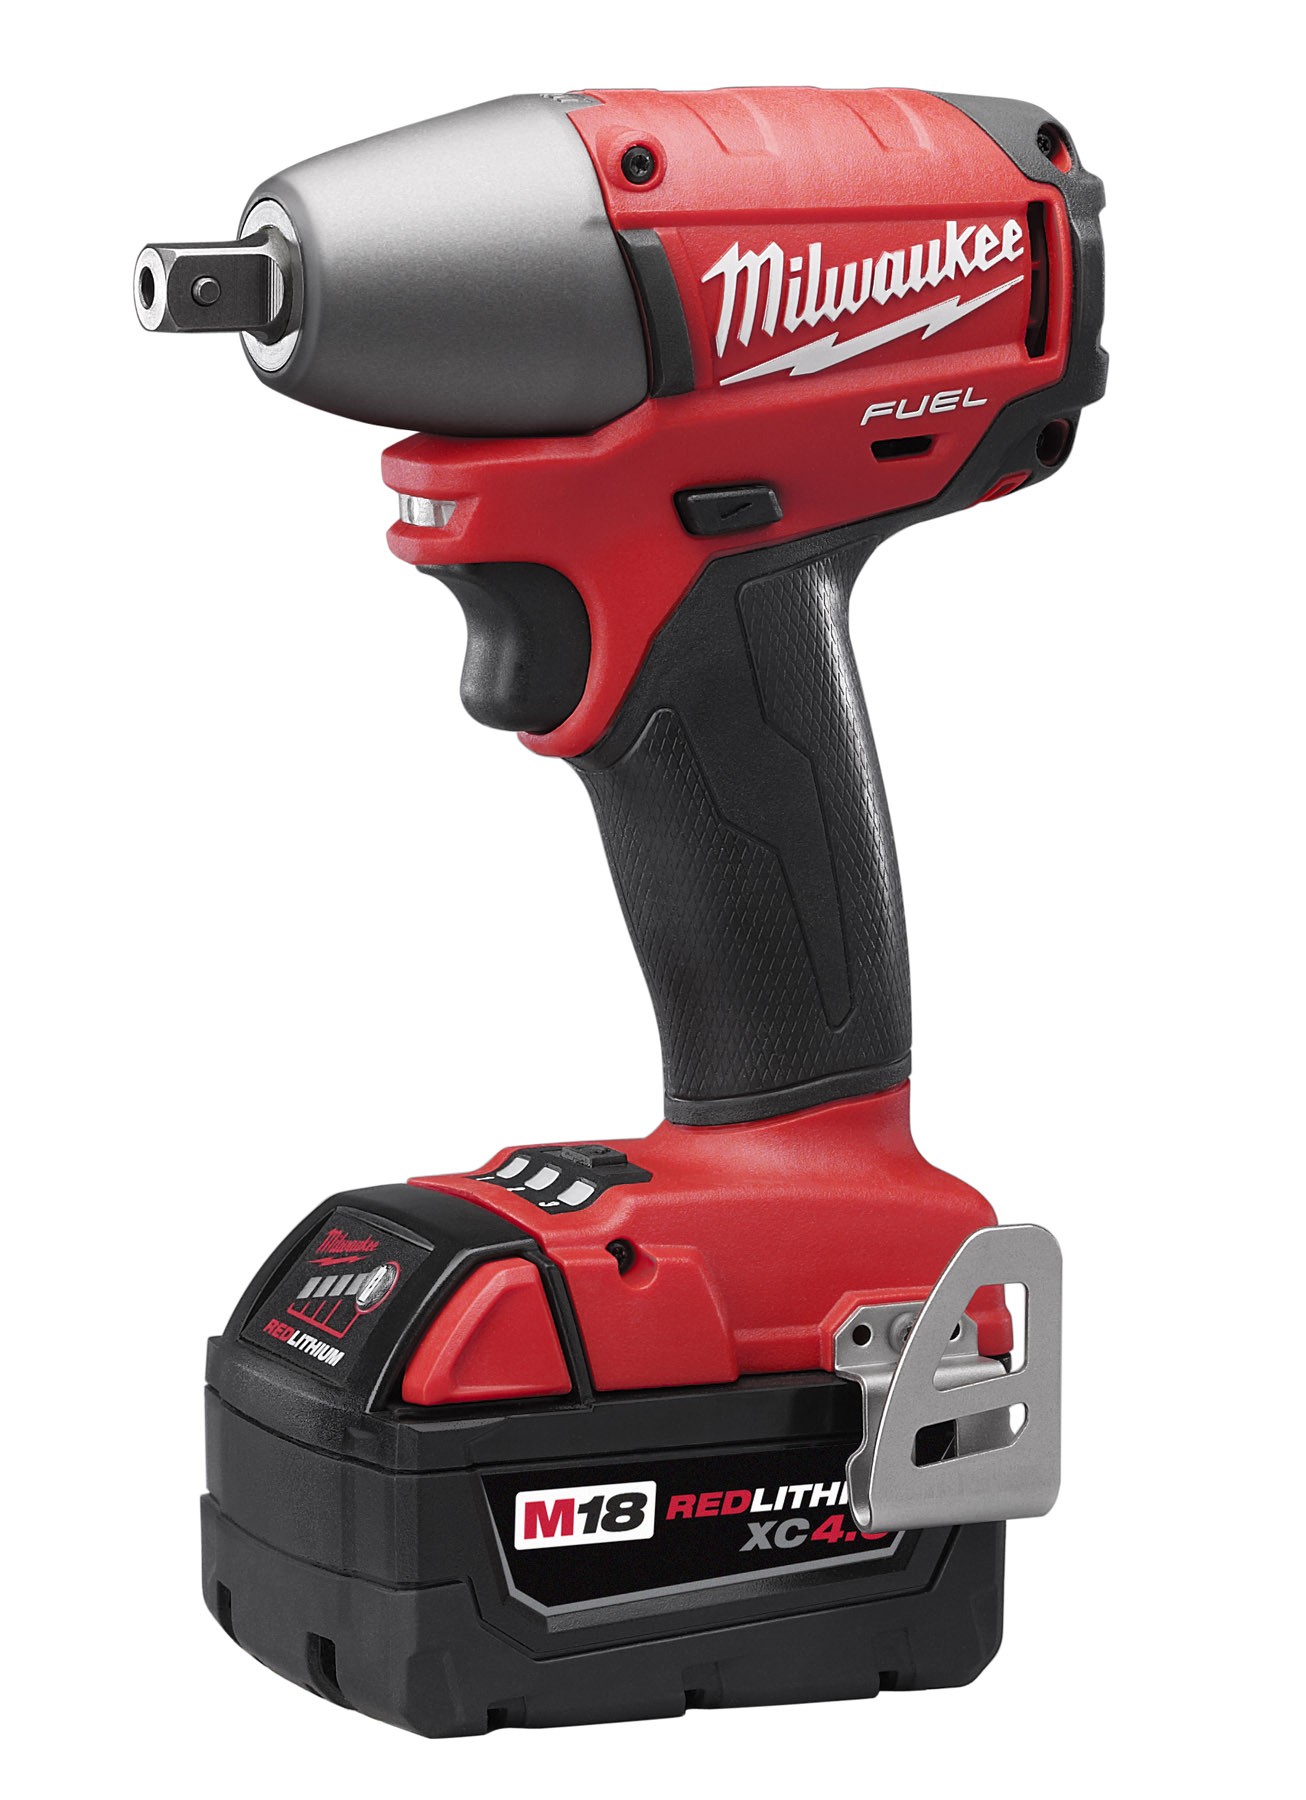 Milwaukee's New M18 Fuel Compact Impact Wrench Tools In Action